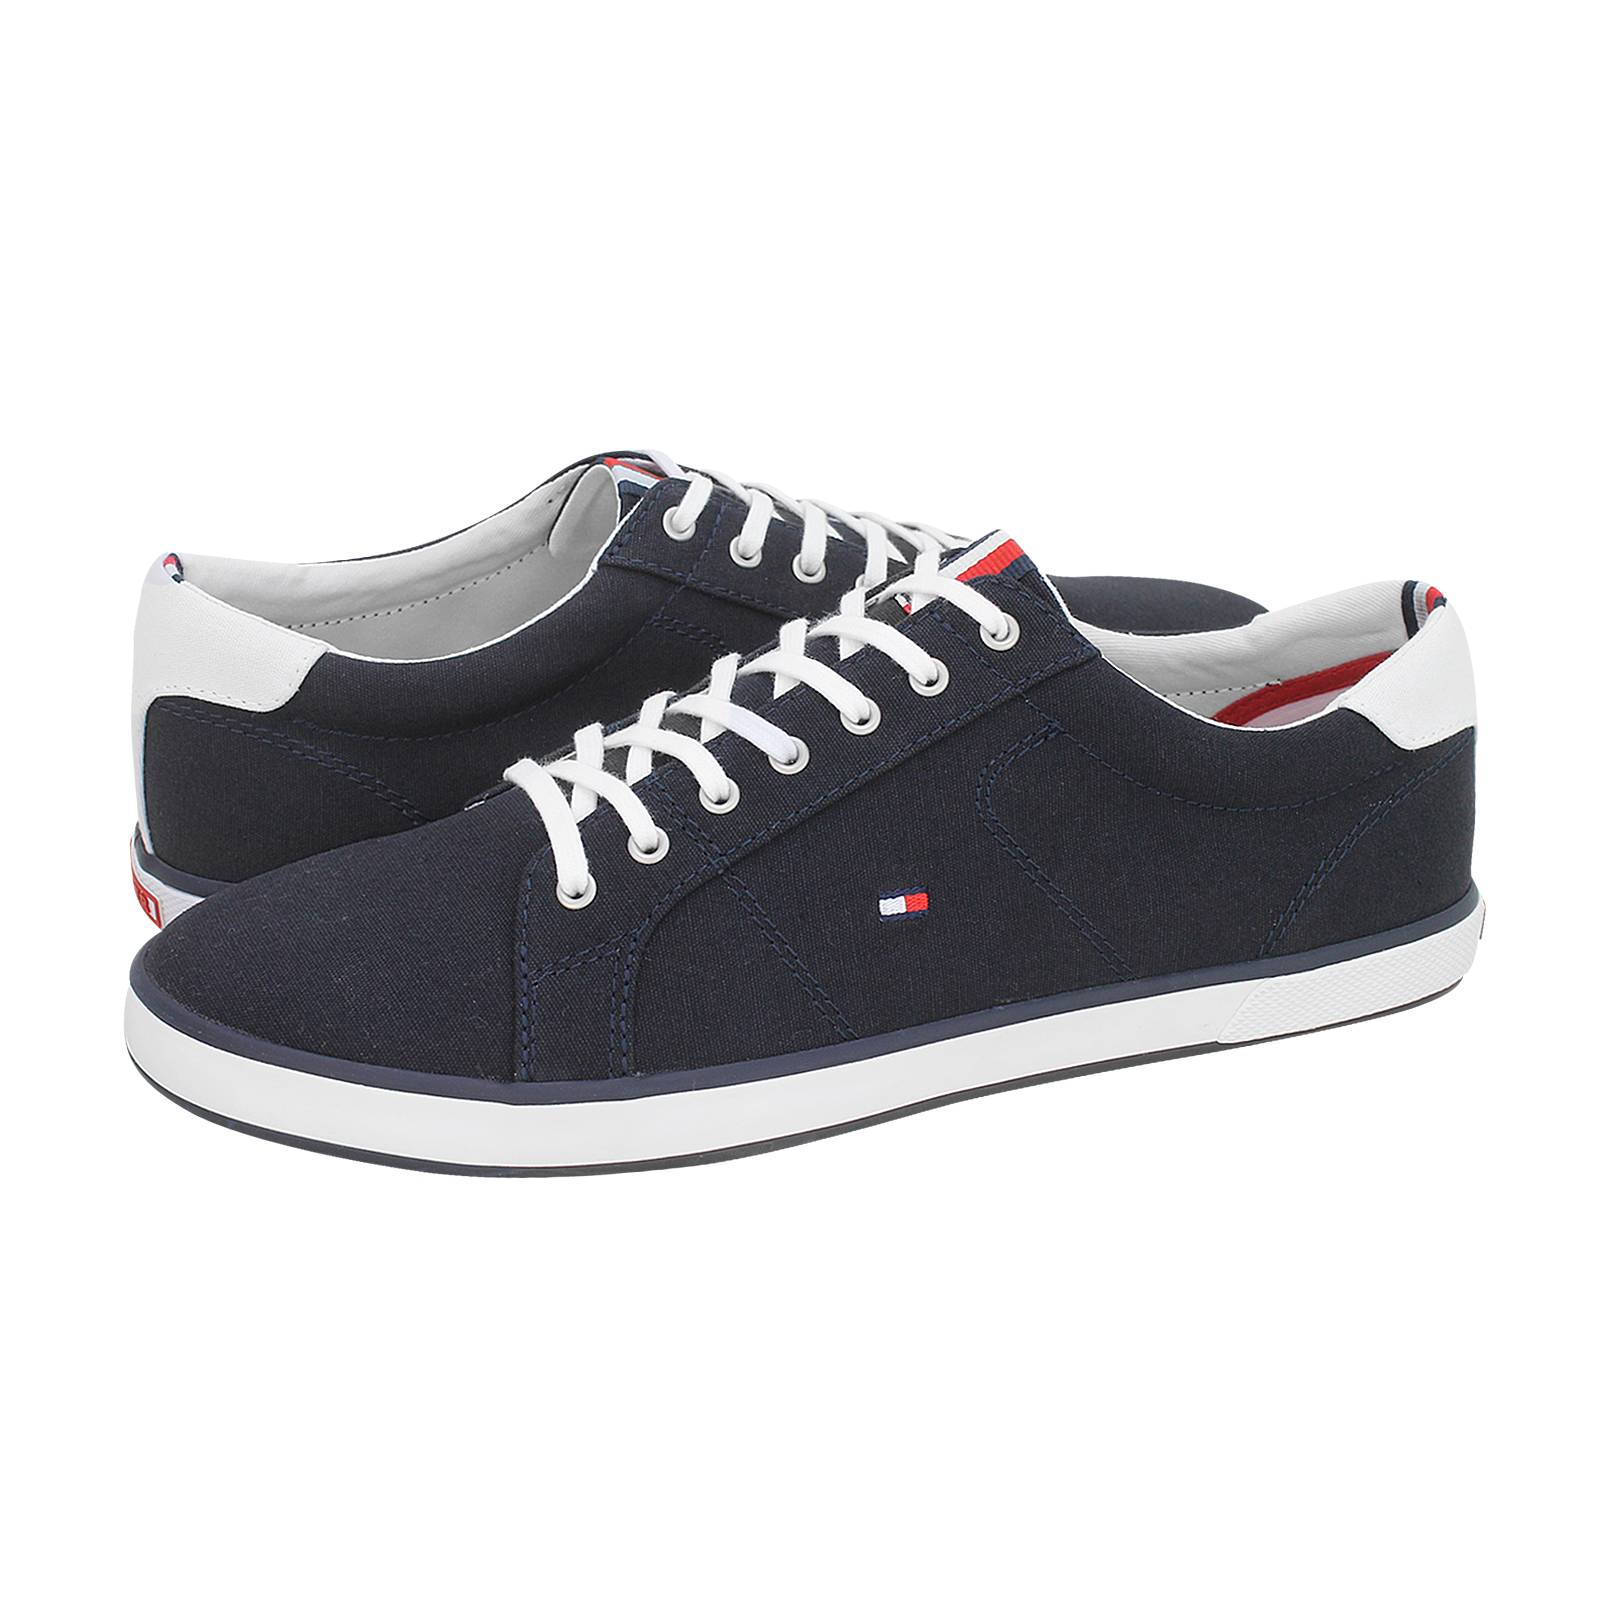 Harlow 1D - Tommy Hilfiger Men's casual shoes made of fabric Gianna Kazakou Online